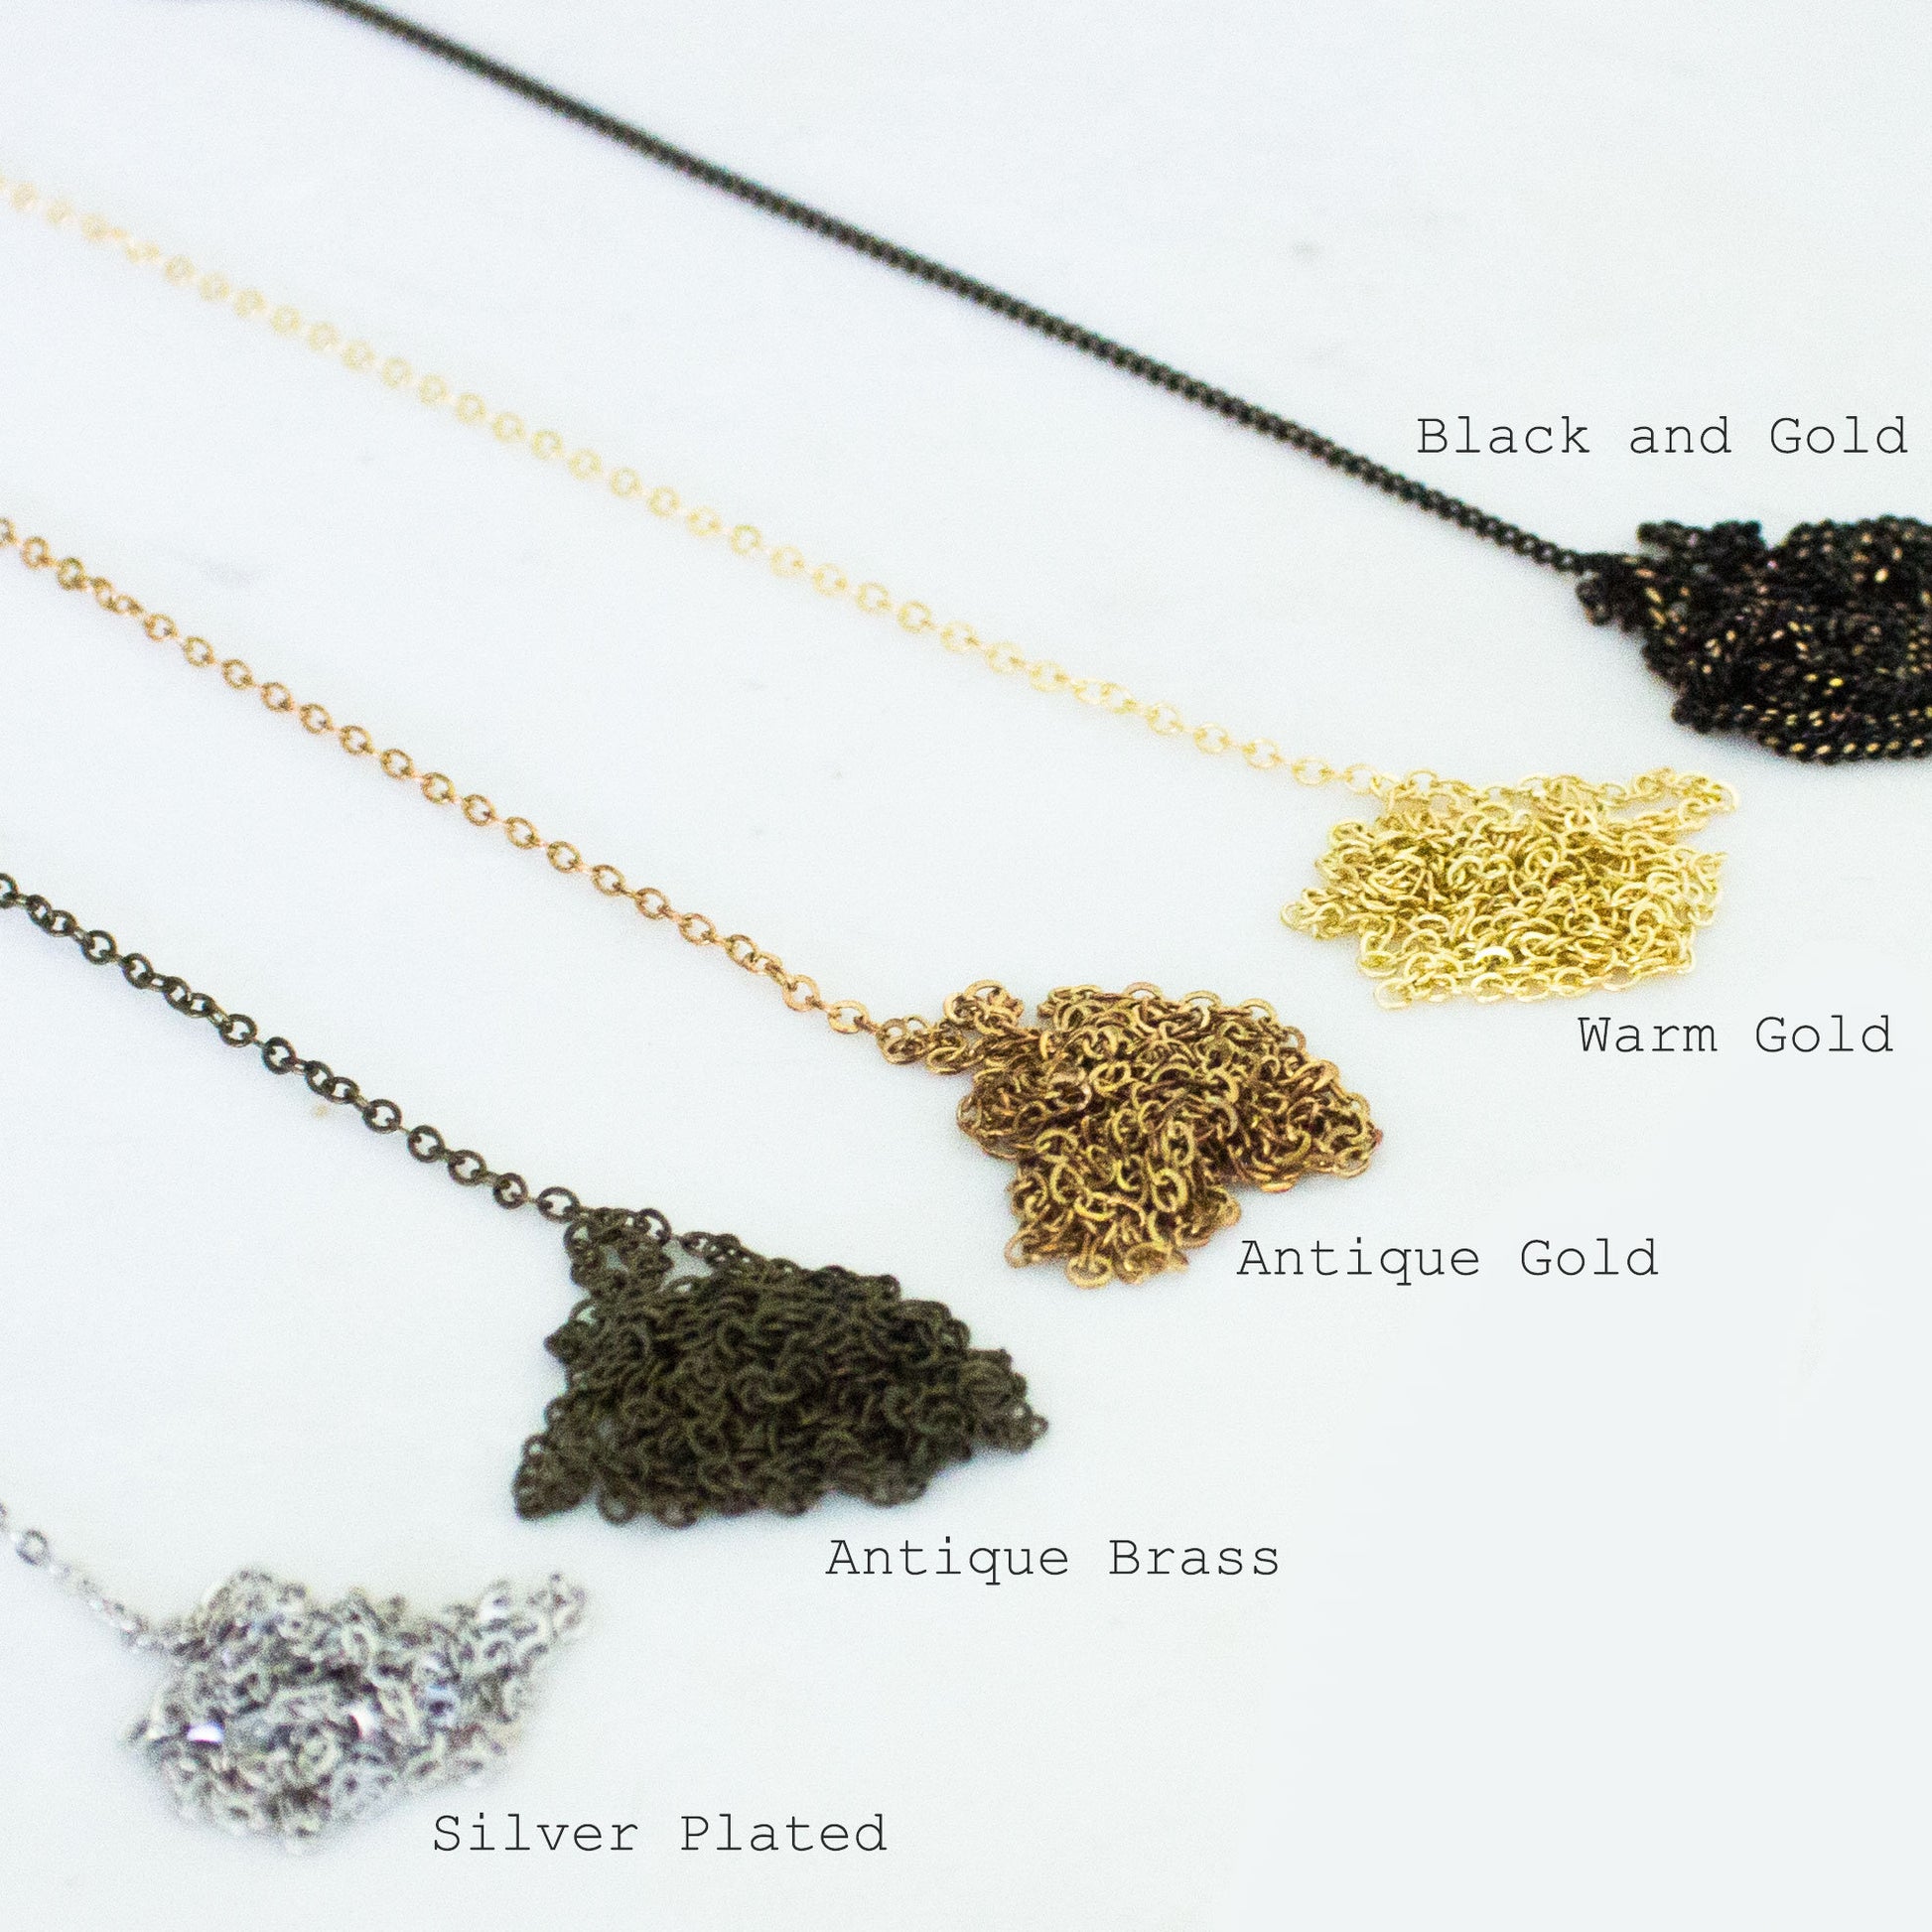 5 different chain options, silver plated, antique brass, antique gold, warm gold and black and gold